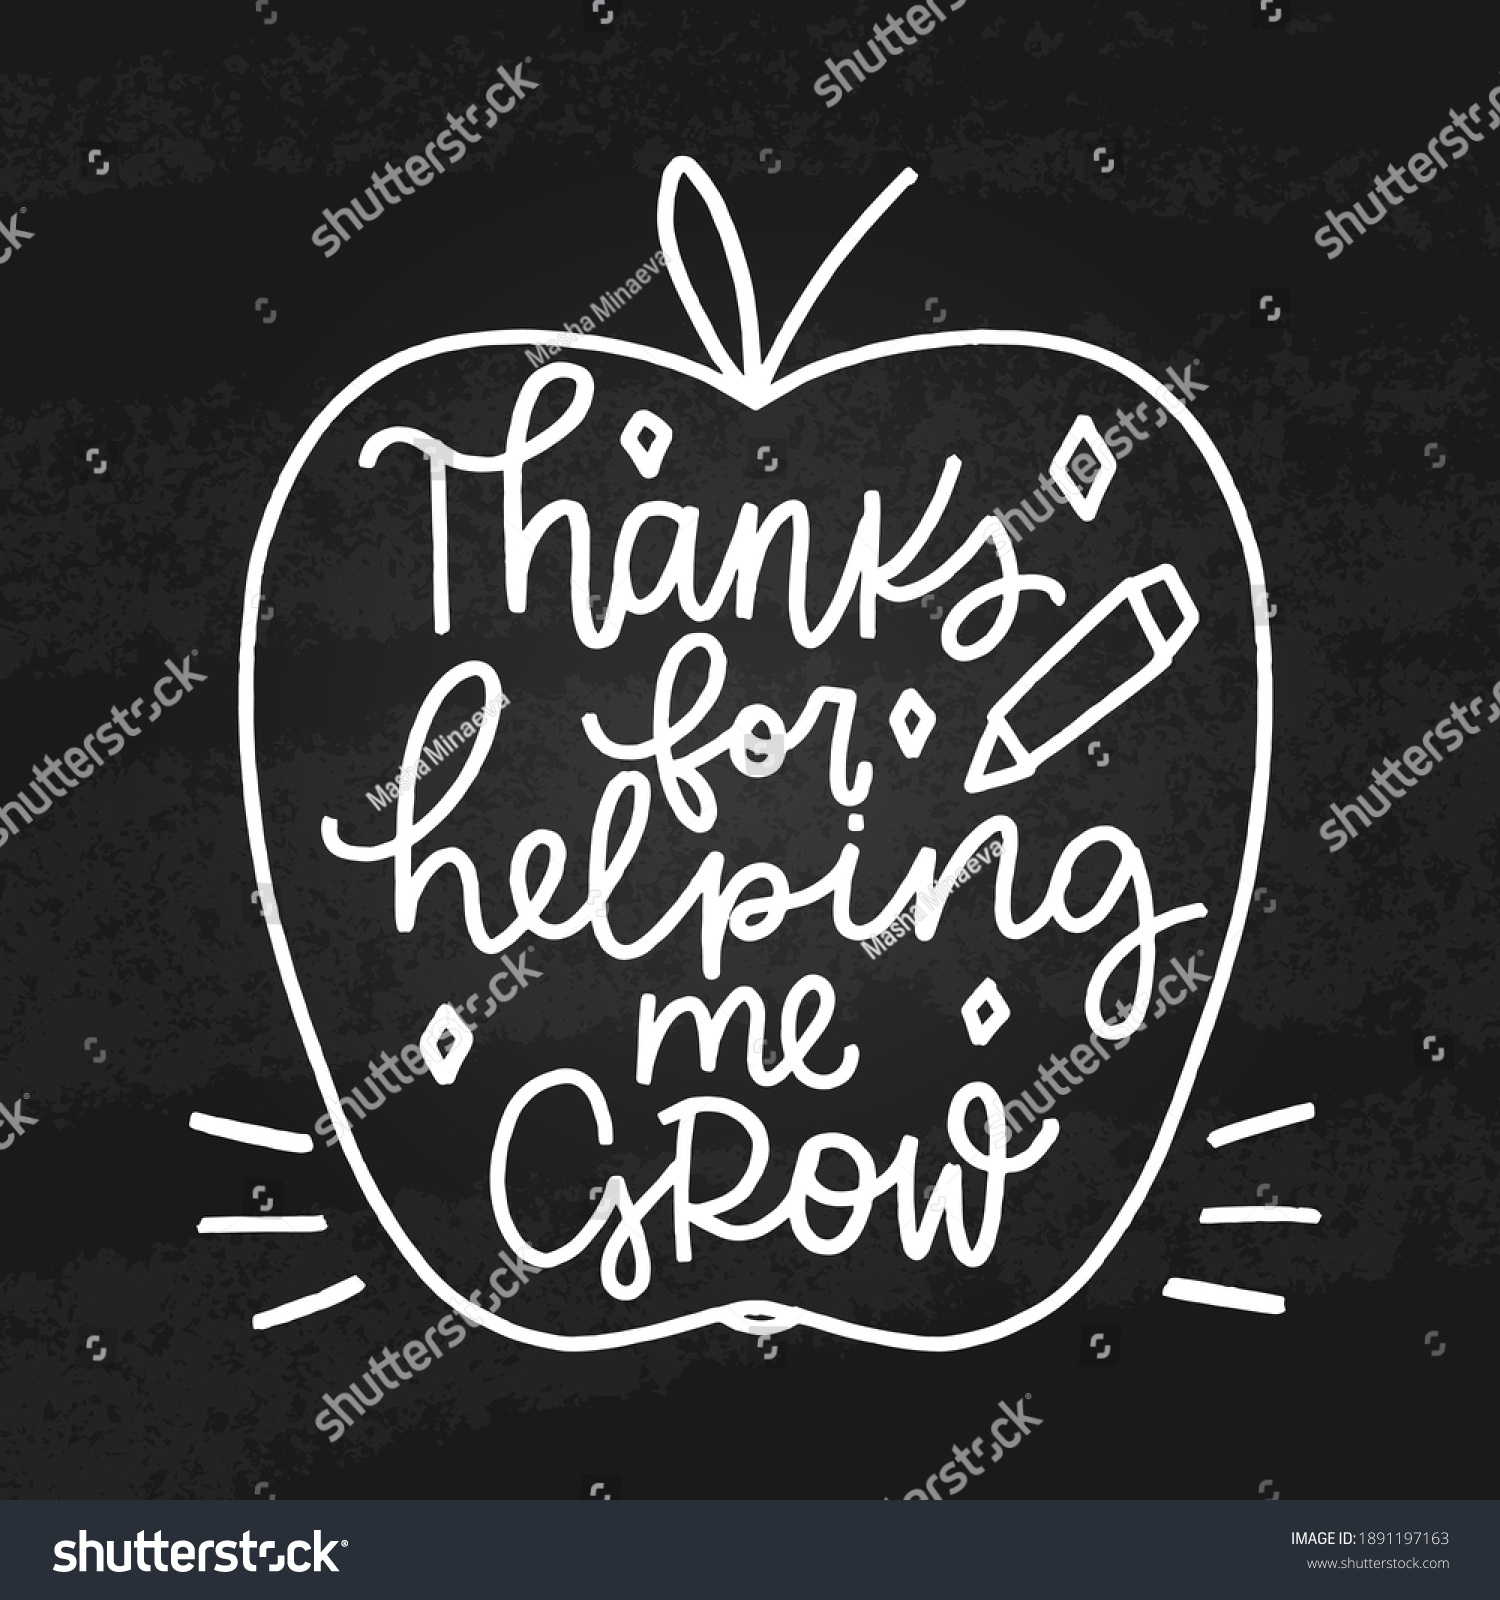 SVG of Teacher gratitude card vector design with chalkboard background, apple shape and pencil. Thanks for helping me grow, hand lettering quote. svg